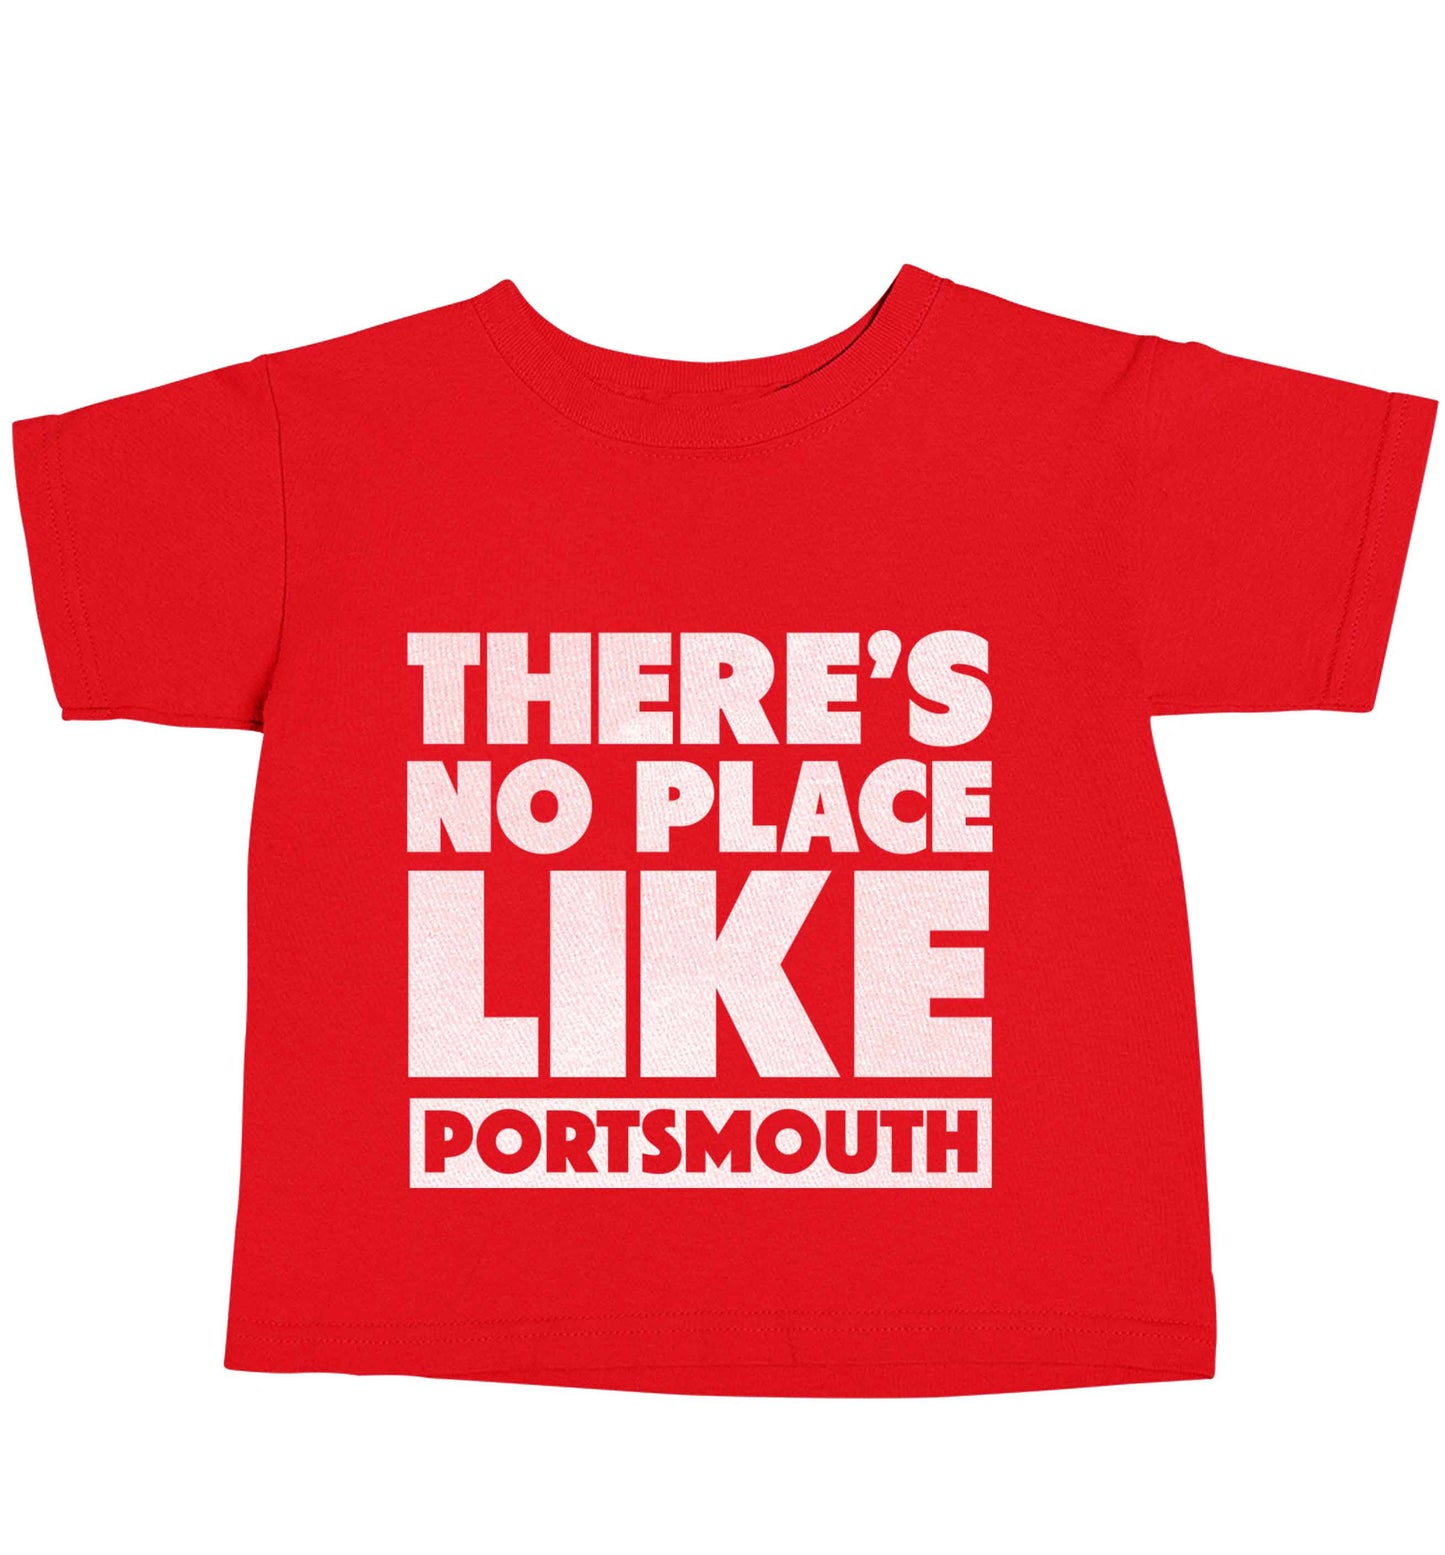 There's no place like Porstmouth red baby toddler Tshirt 2 Years